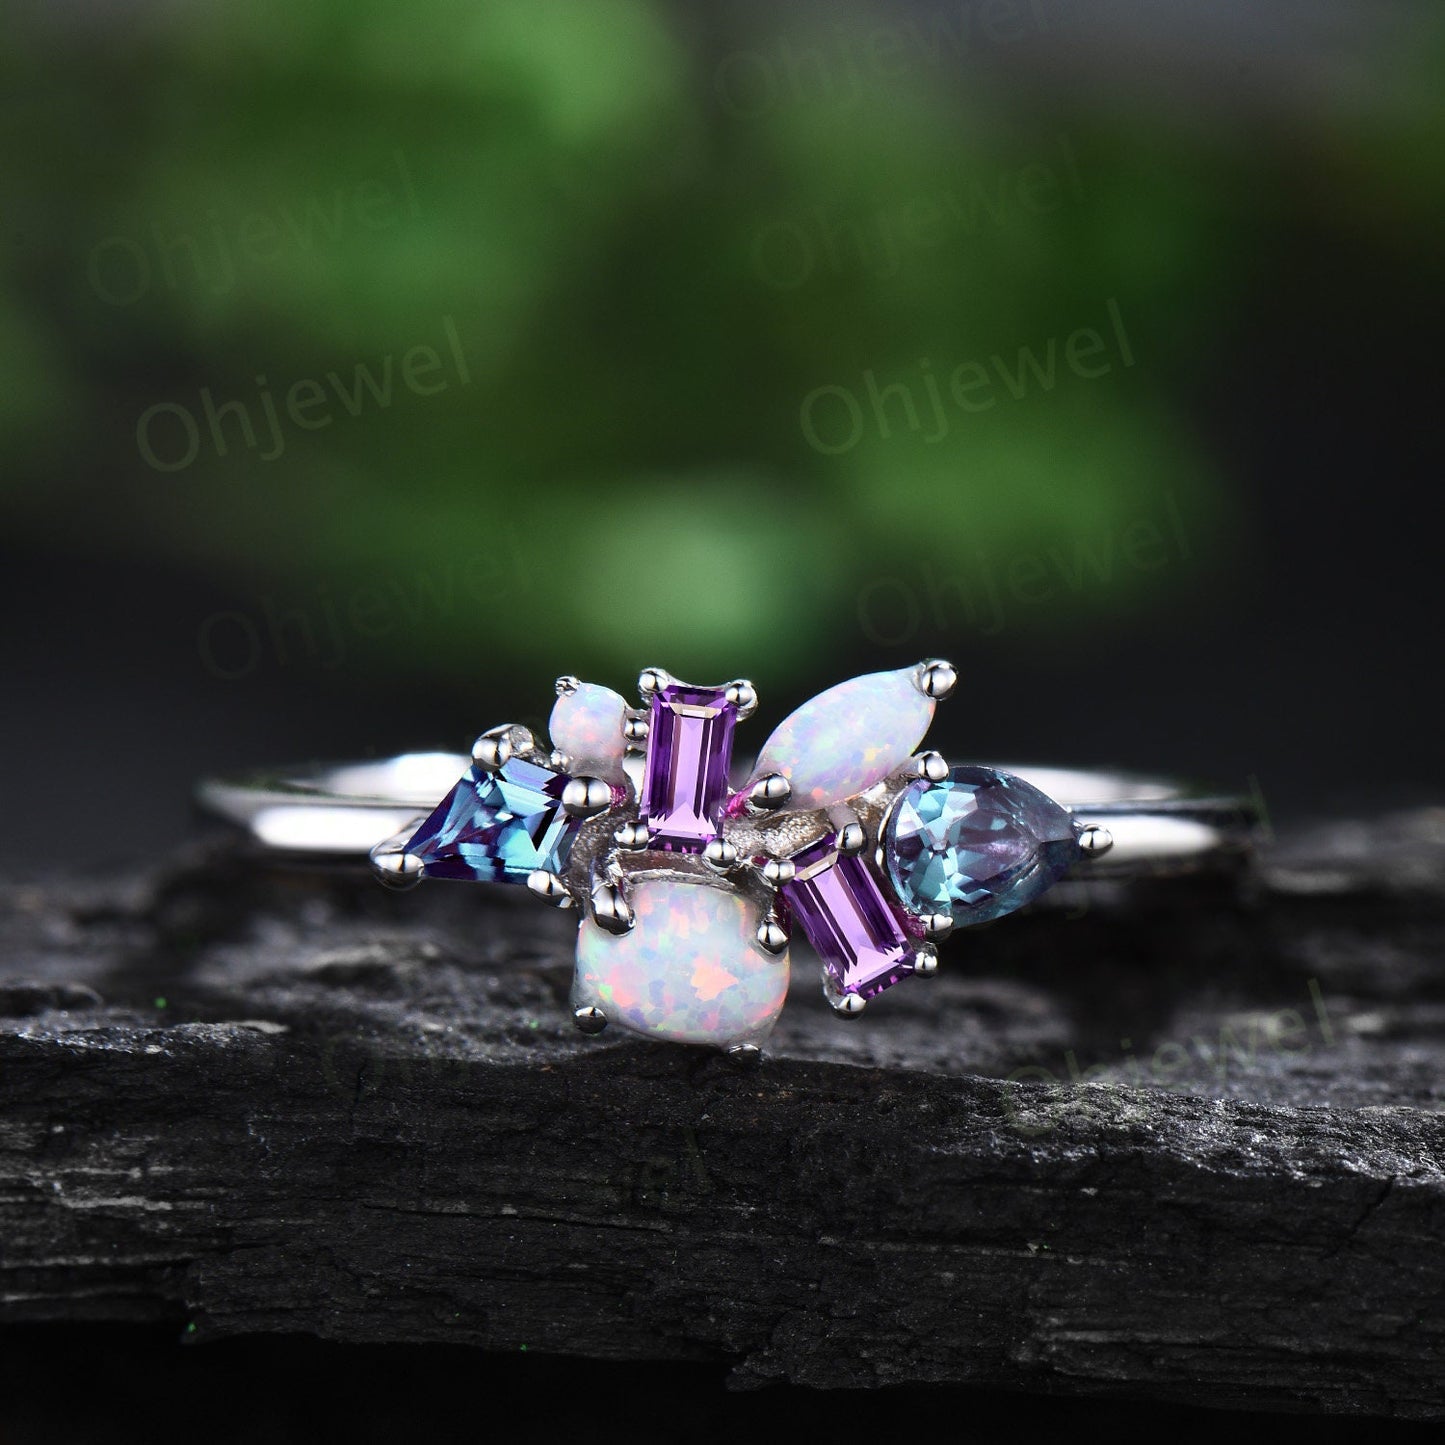 Unique oval opal ring vintage kite alexandrite ring white gold baguette cut amethyst ring women dainty wedding ring band anniversary gift